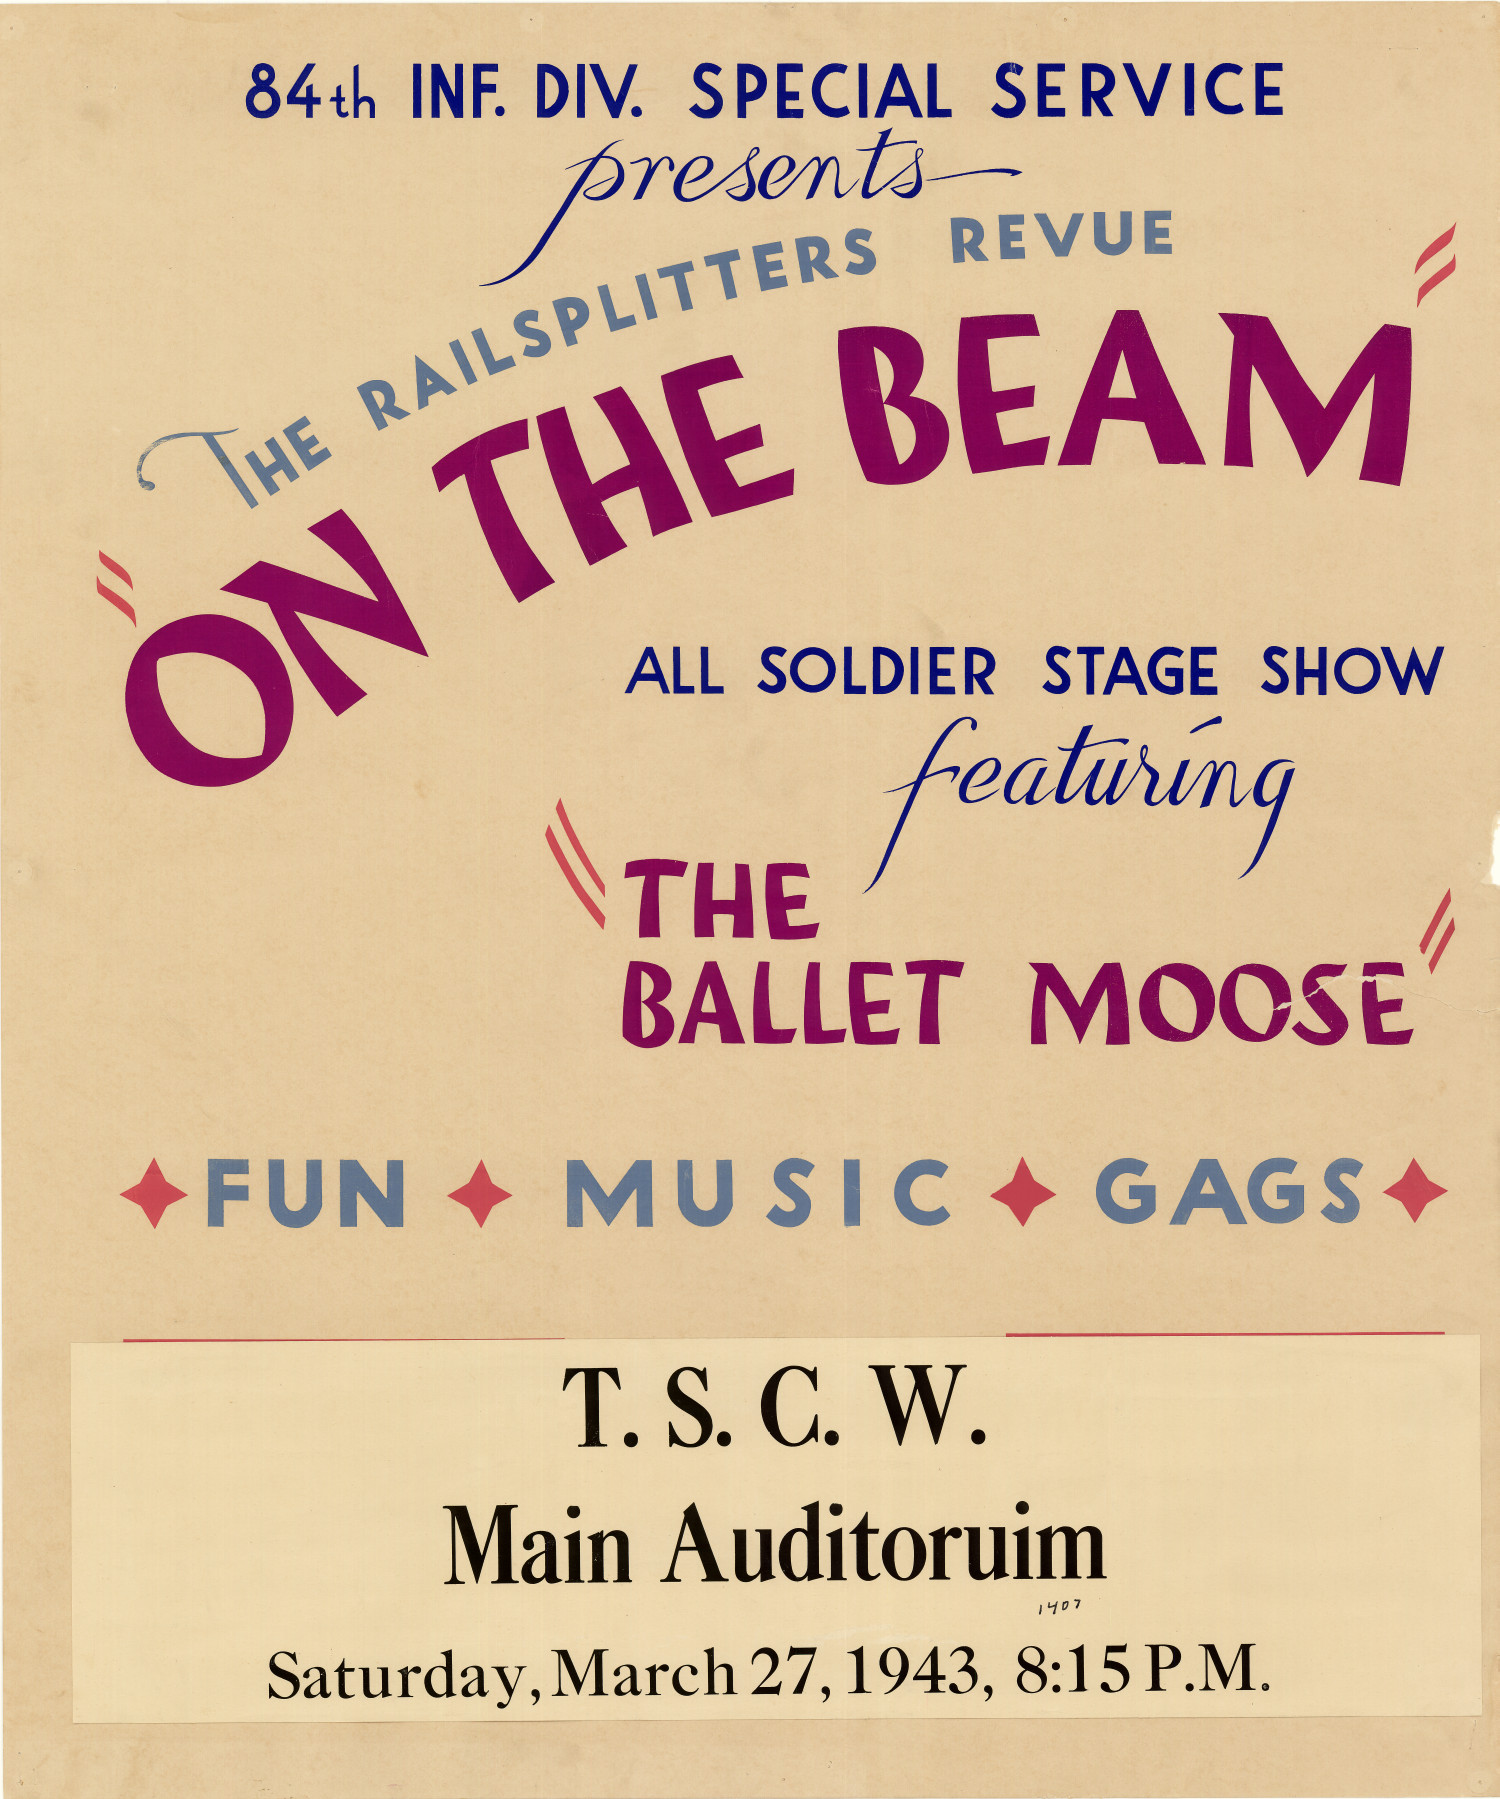 84th Inf. Div. Special Service presents the Railsplitters Revue "On the Beam" : all soldier stage show featuring "The Ballet Moose". . ..
                                                
                                                    [Sequence #]: 1 of 1
                                                